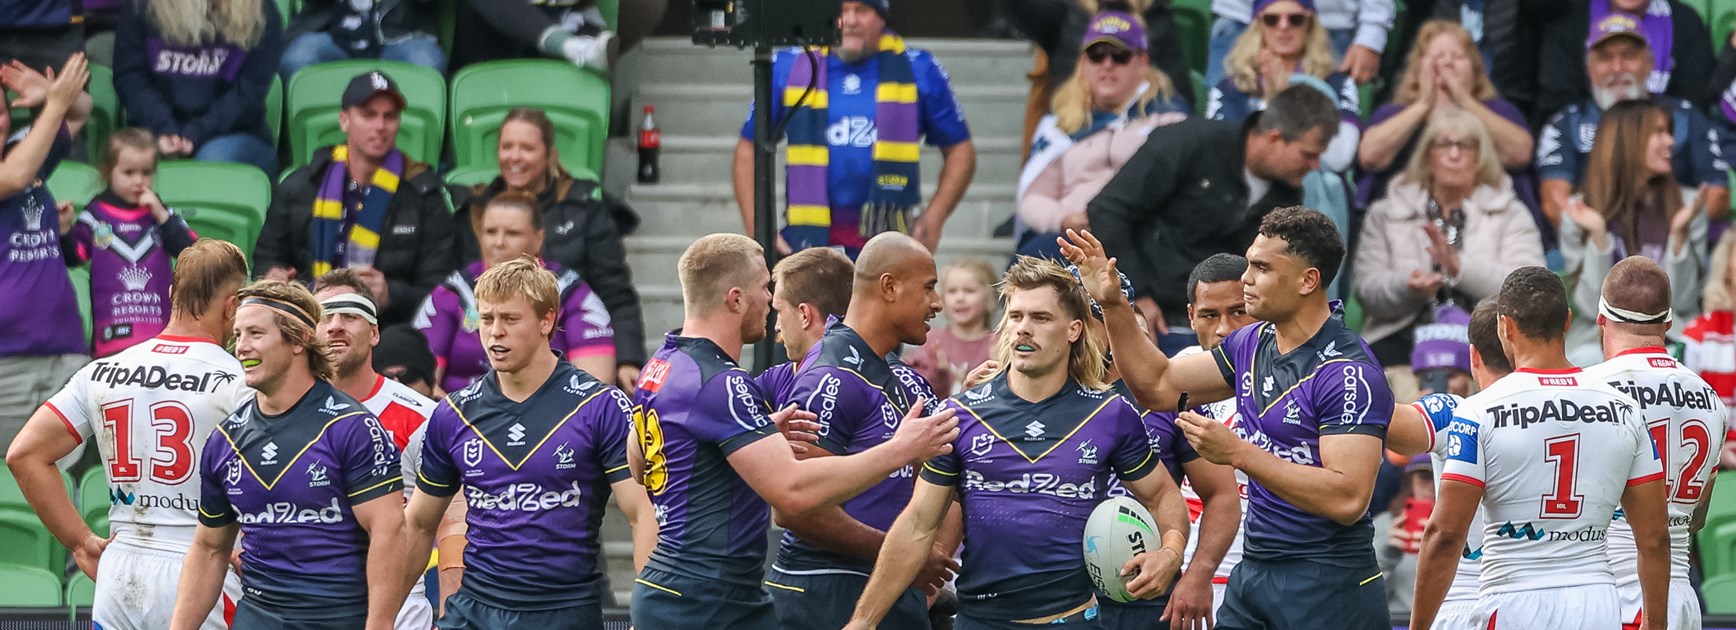 Papenhuyzen injured as Storm continue points-spree in Dragons rout